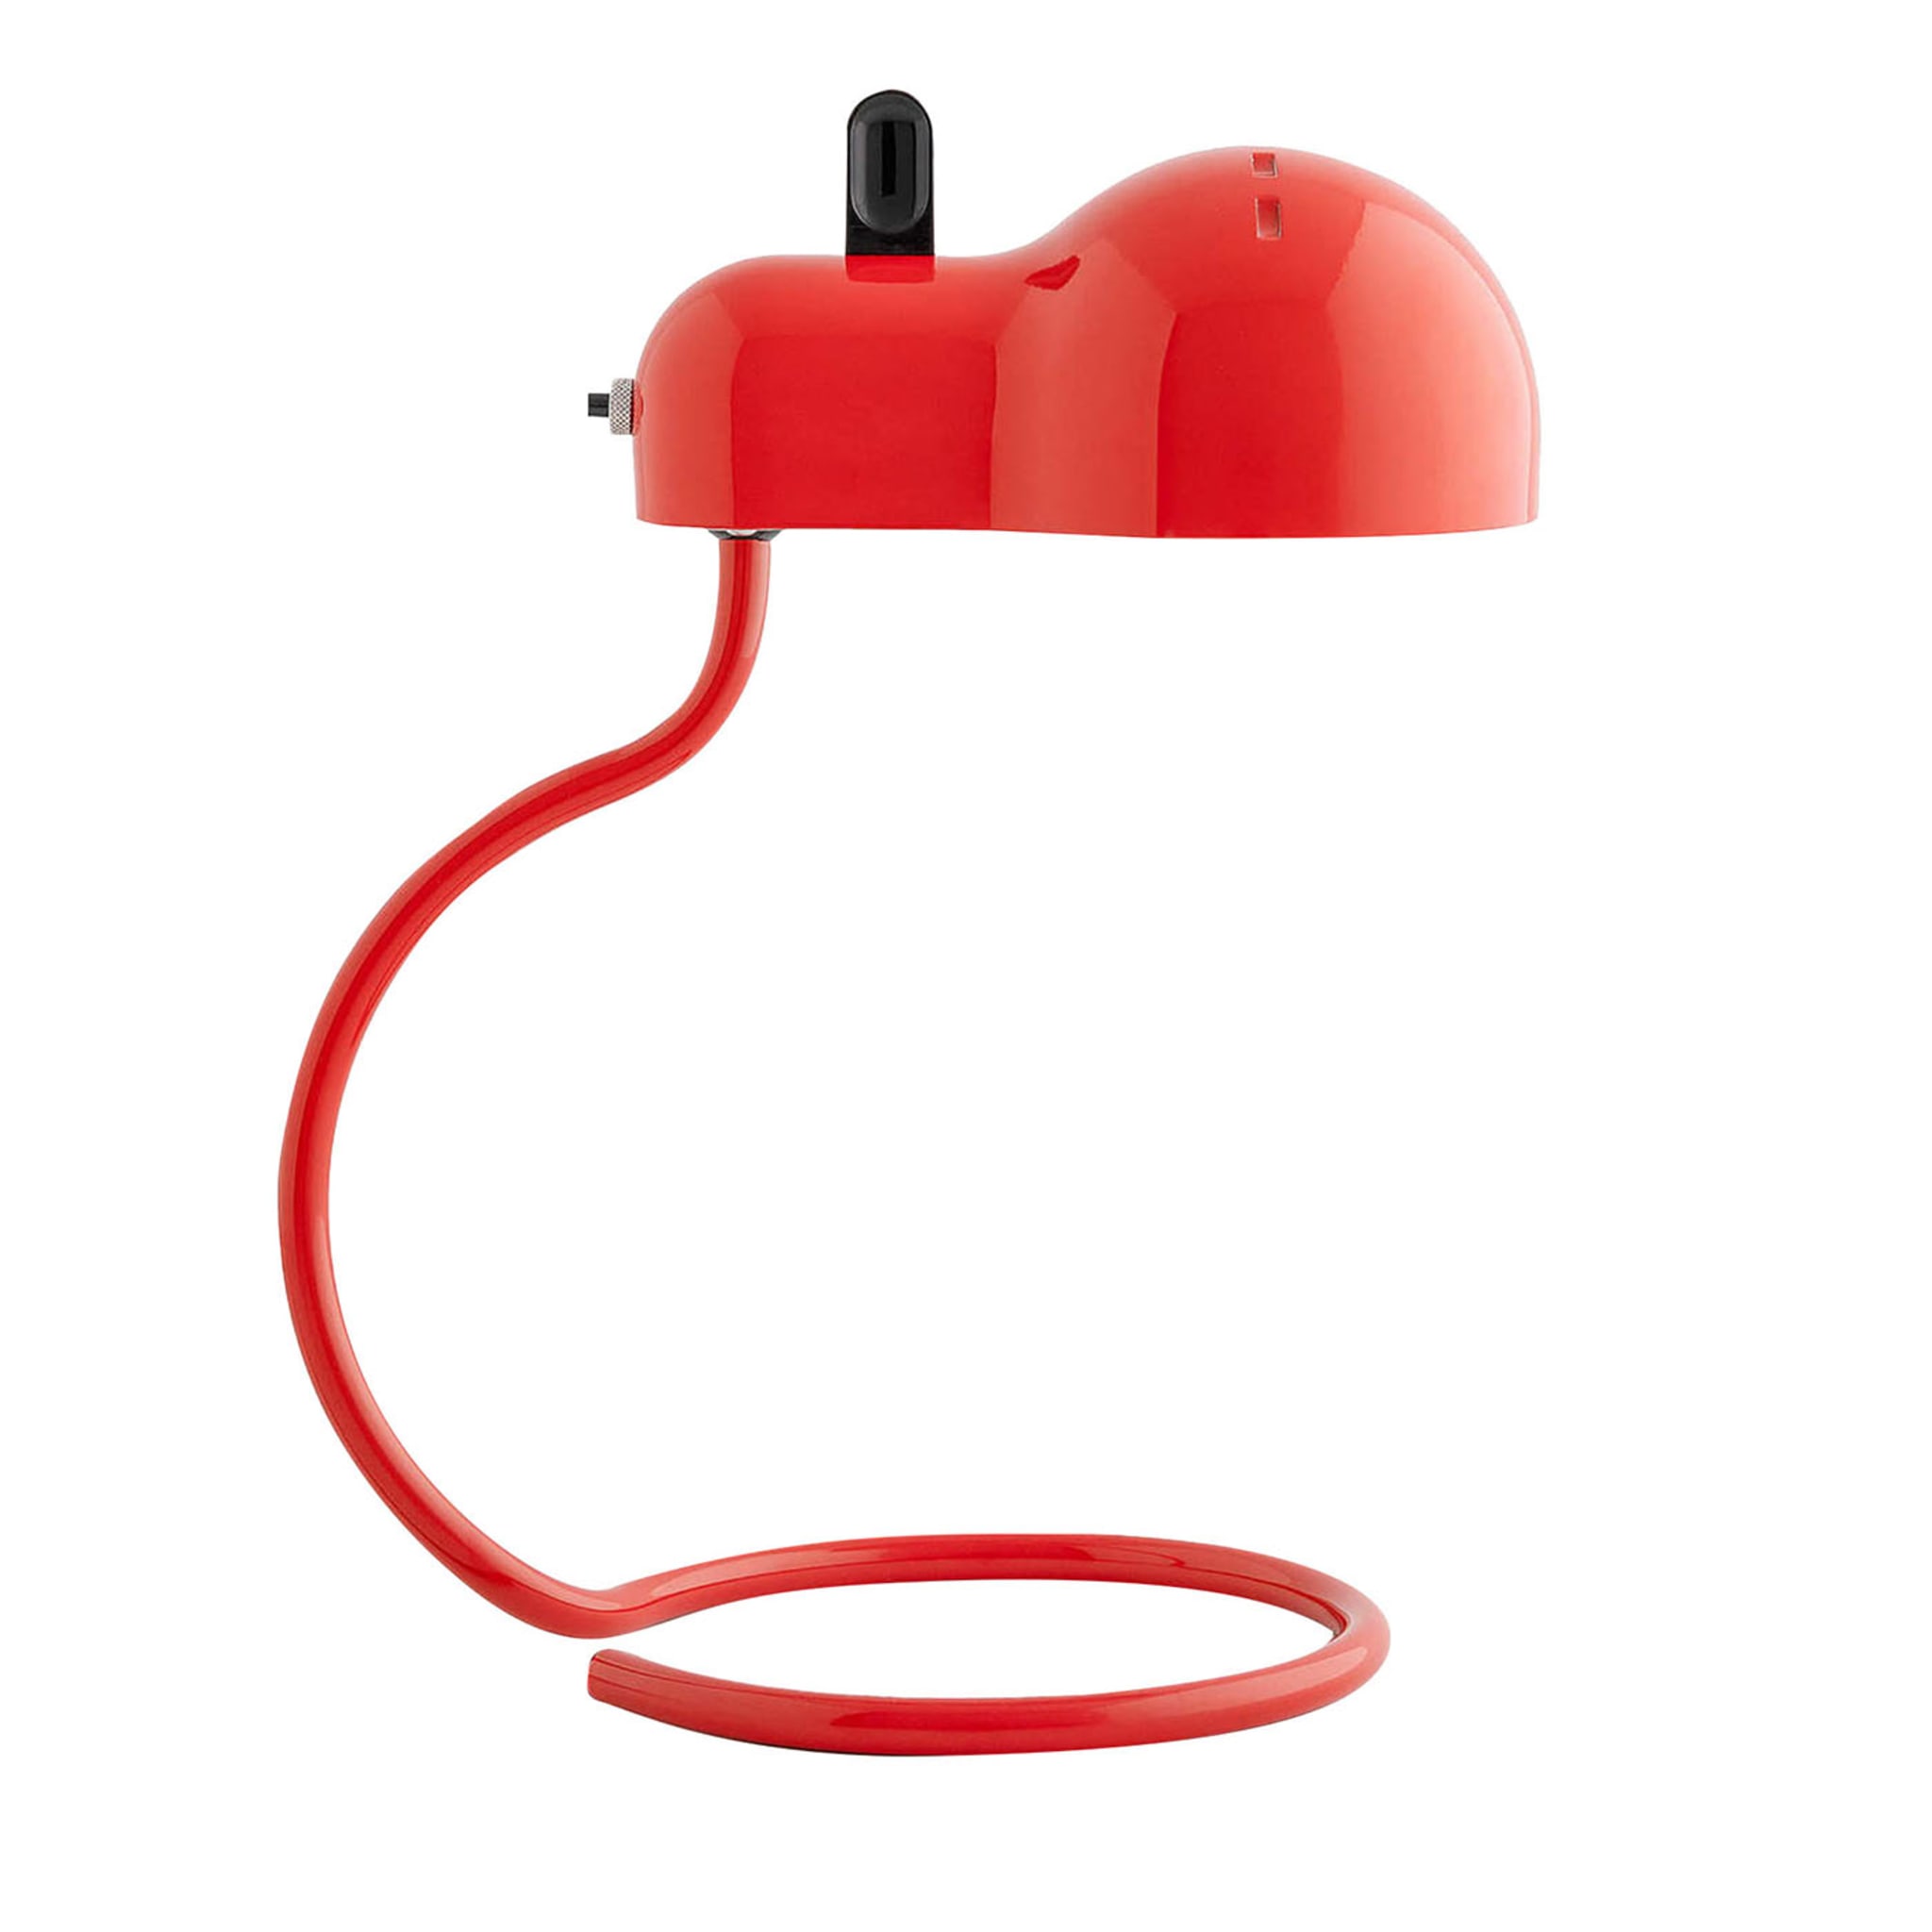 MiniTopo Total Red Table Lamp designed by Joe Colombo - Main view